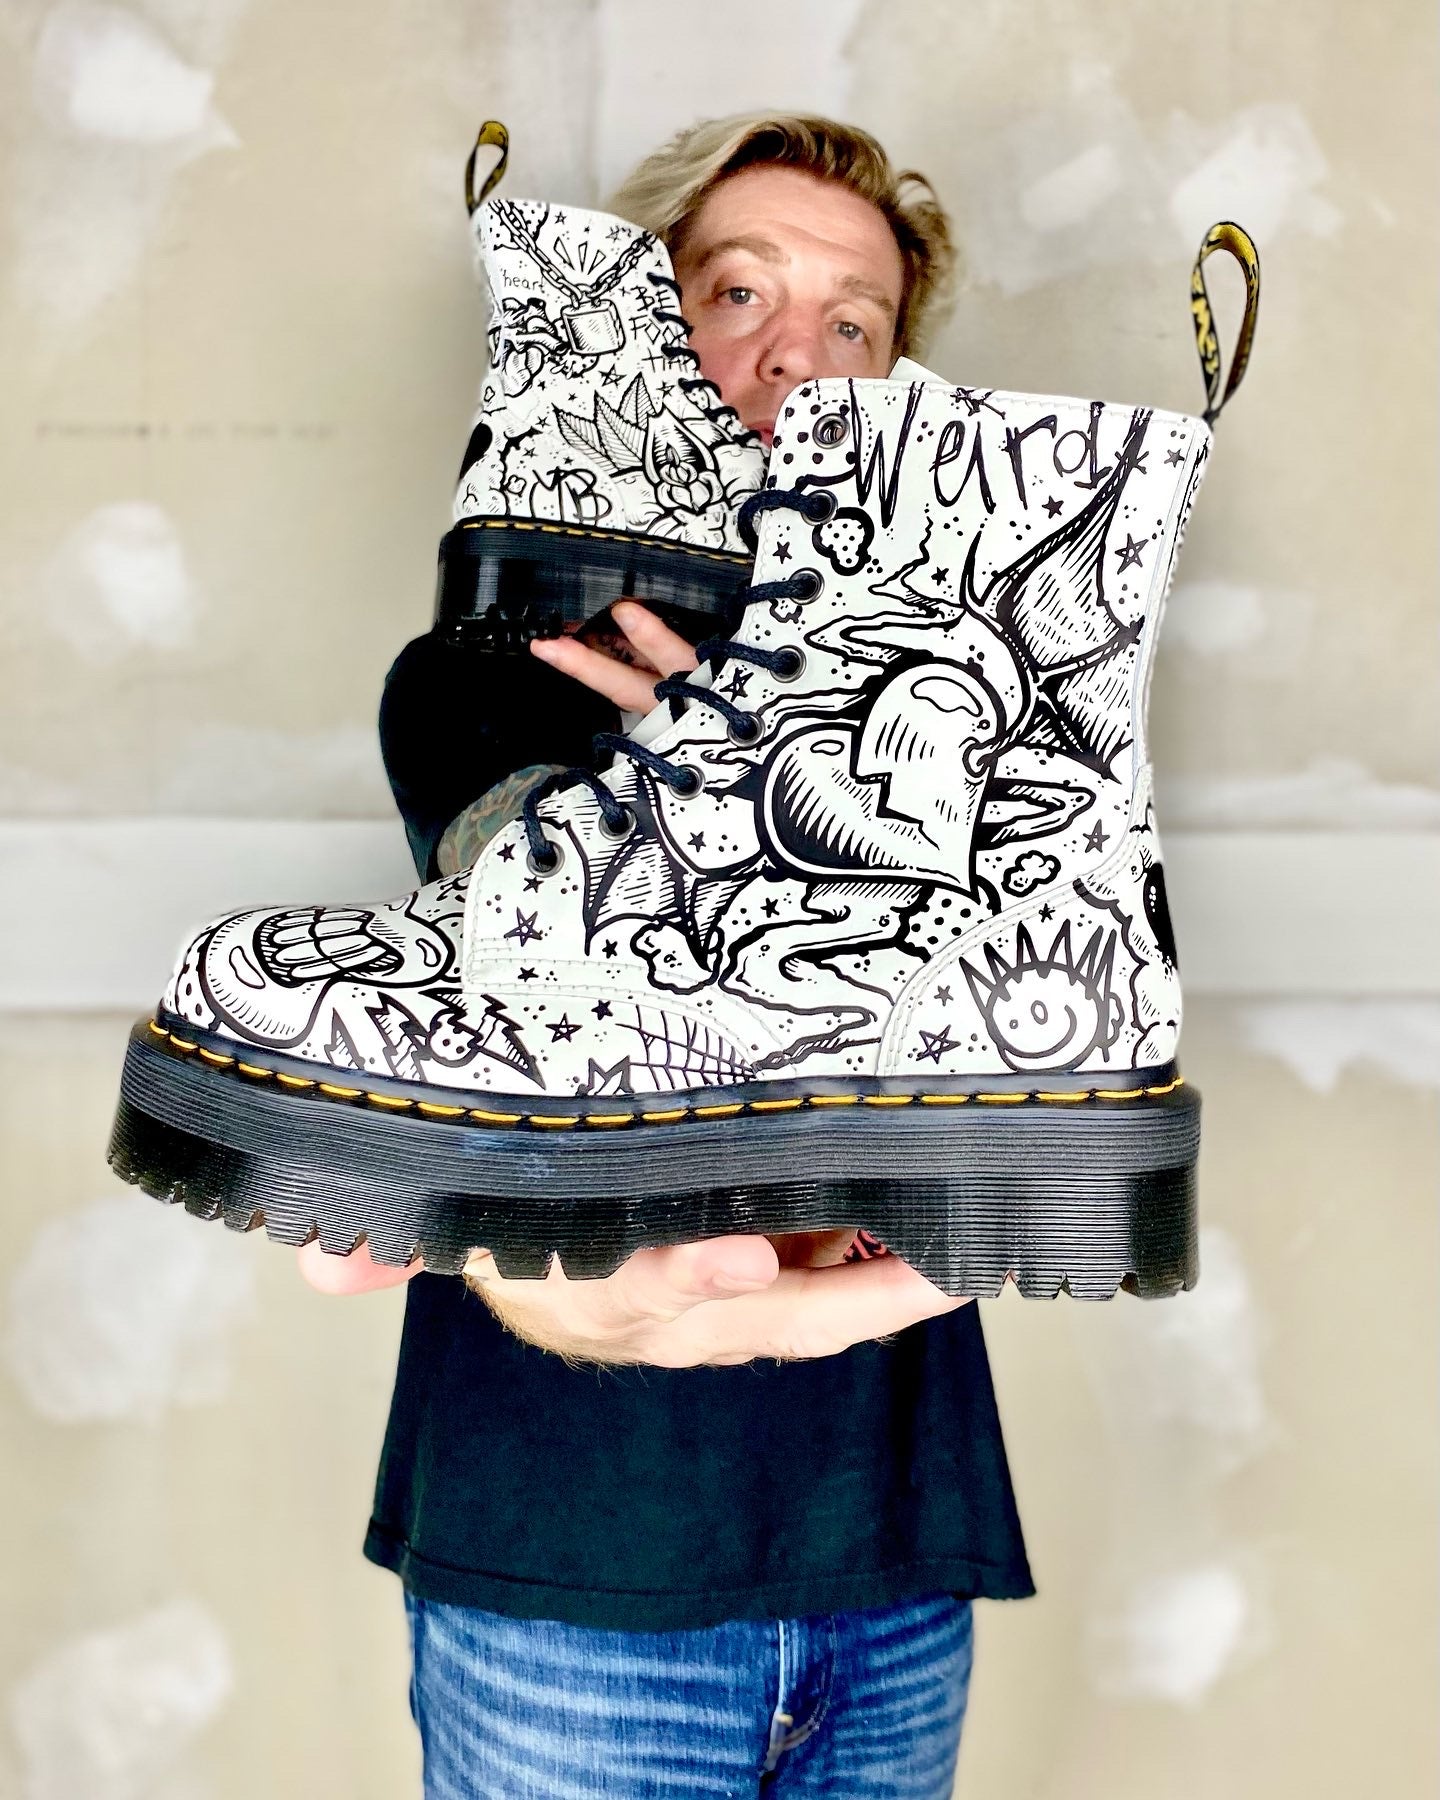 How To Style White Dr. Martens Boots